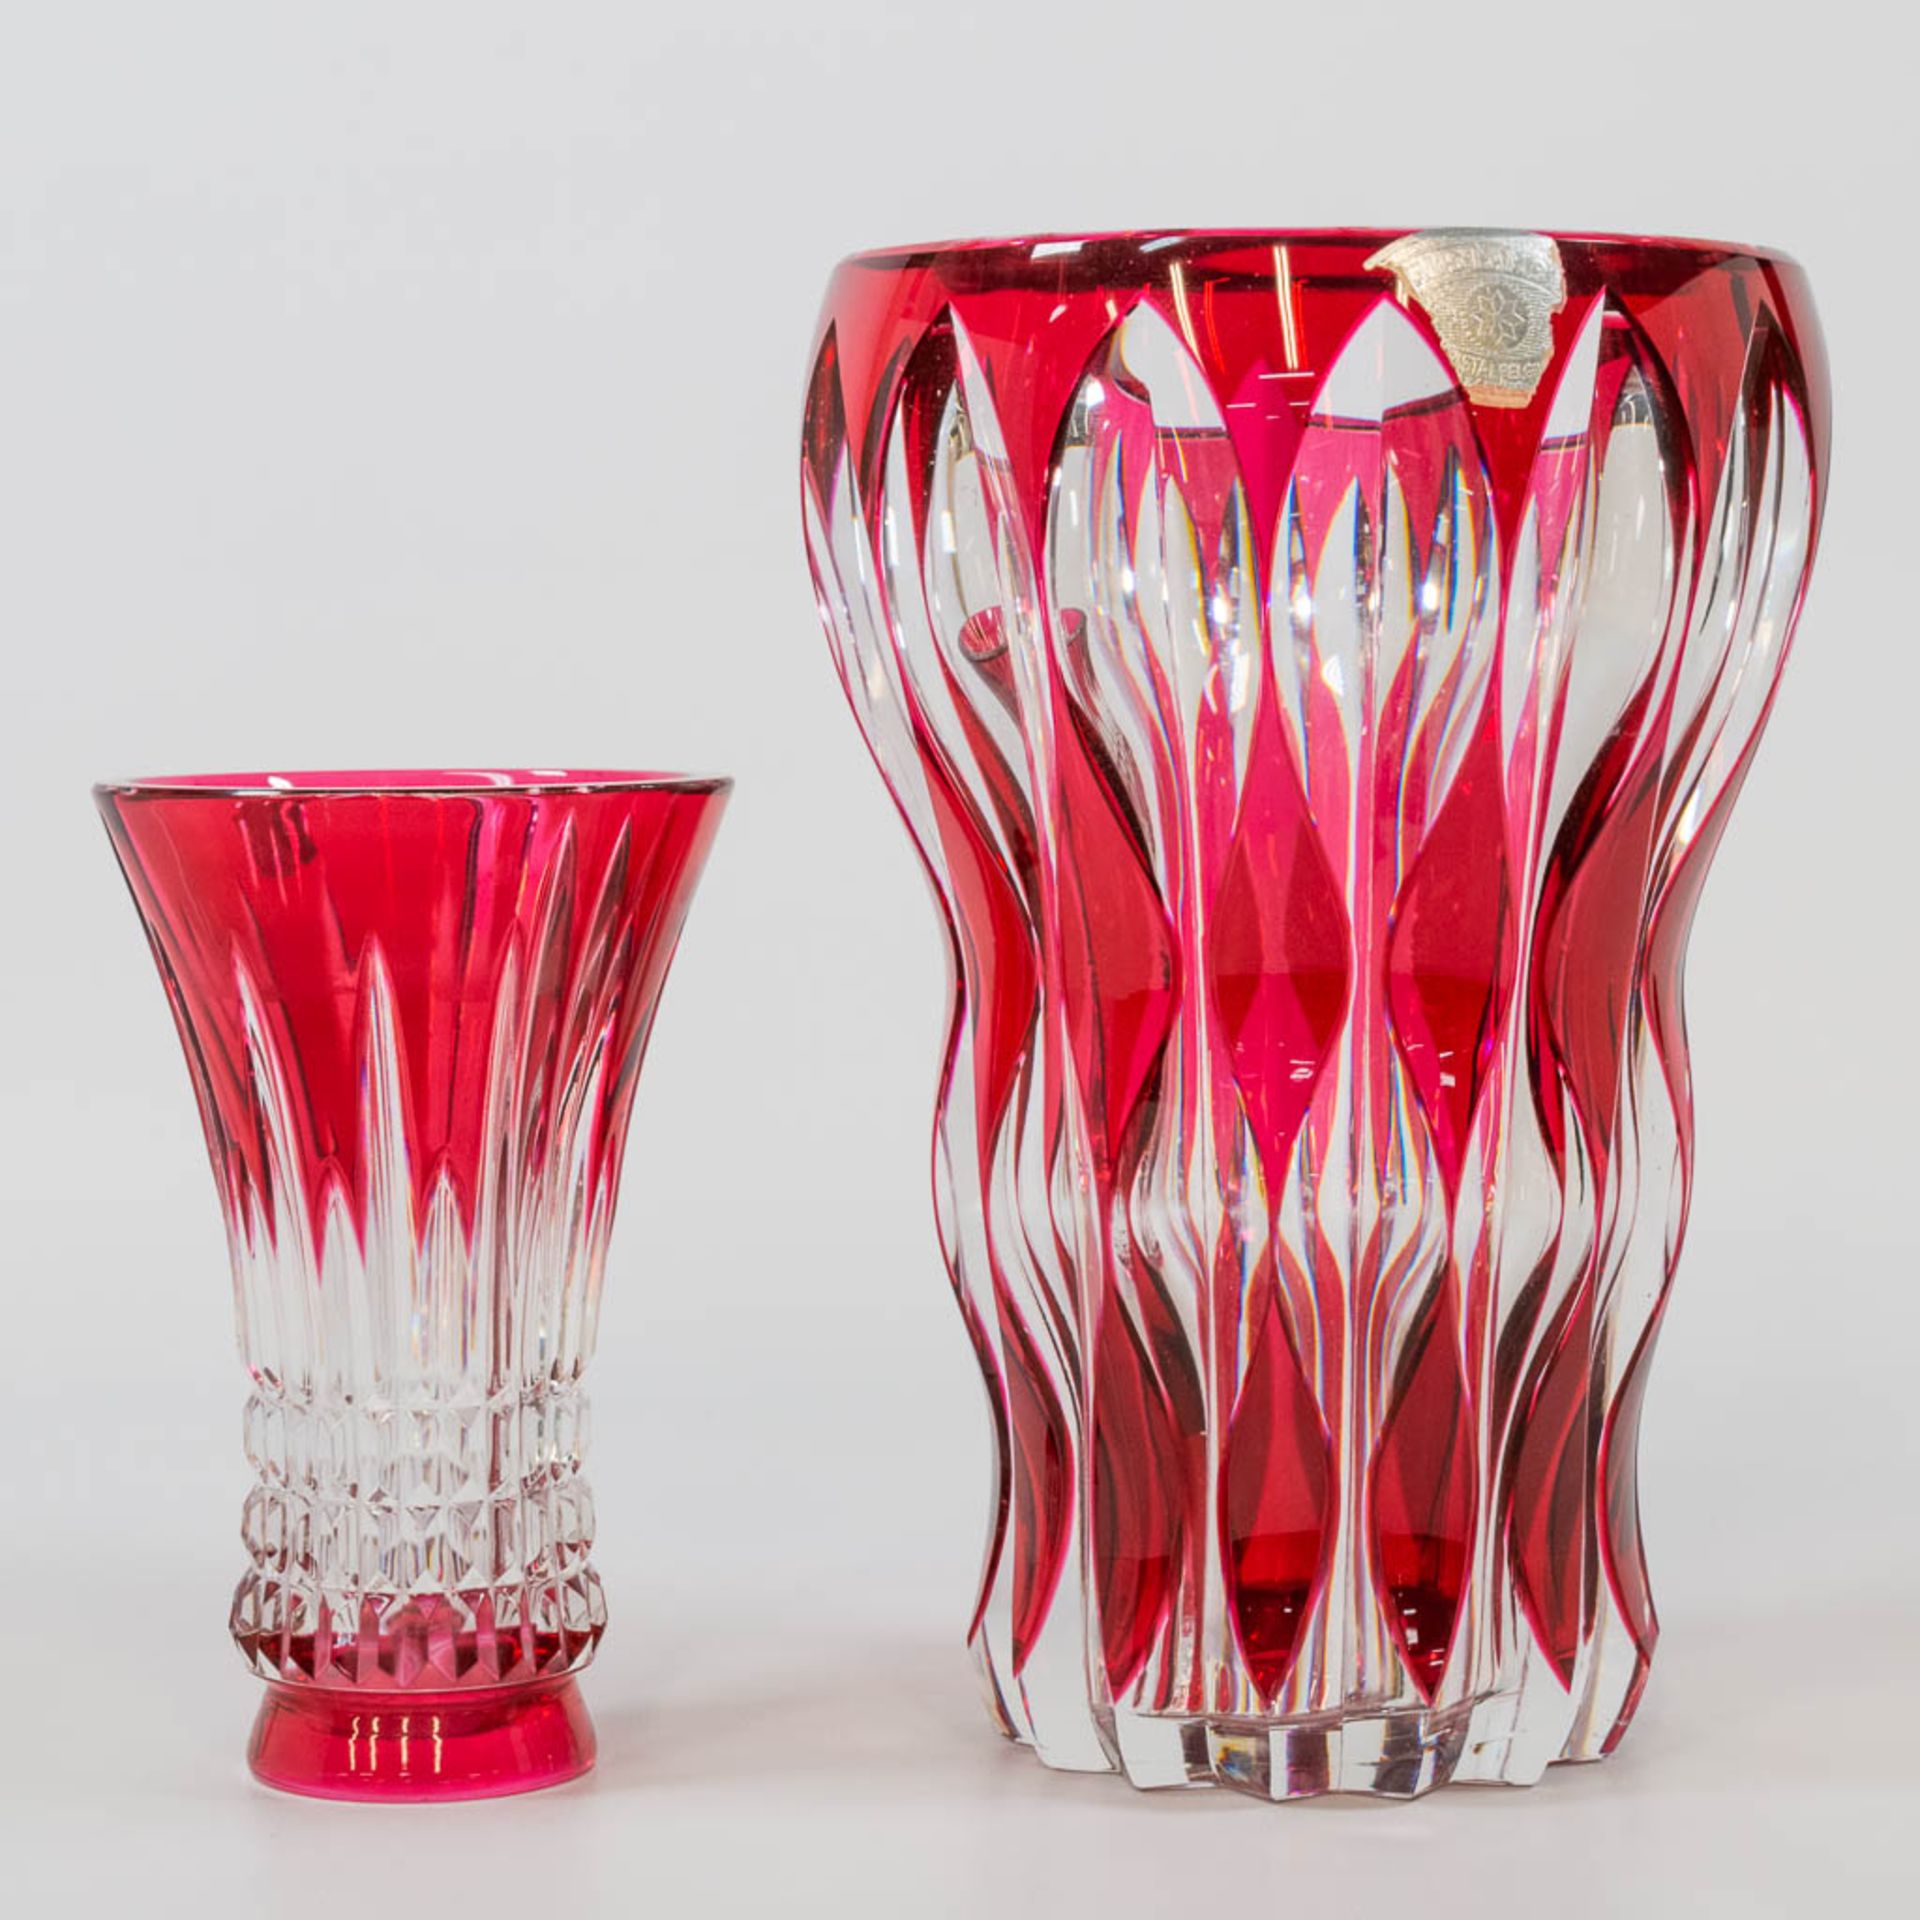 A collection of 2 vases made of cut crystal and marked Val Saint Lambert. (23 x 16 cm)